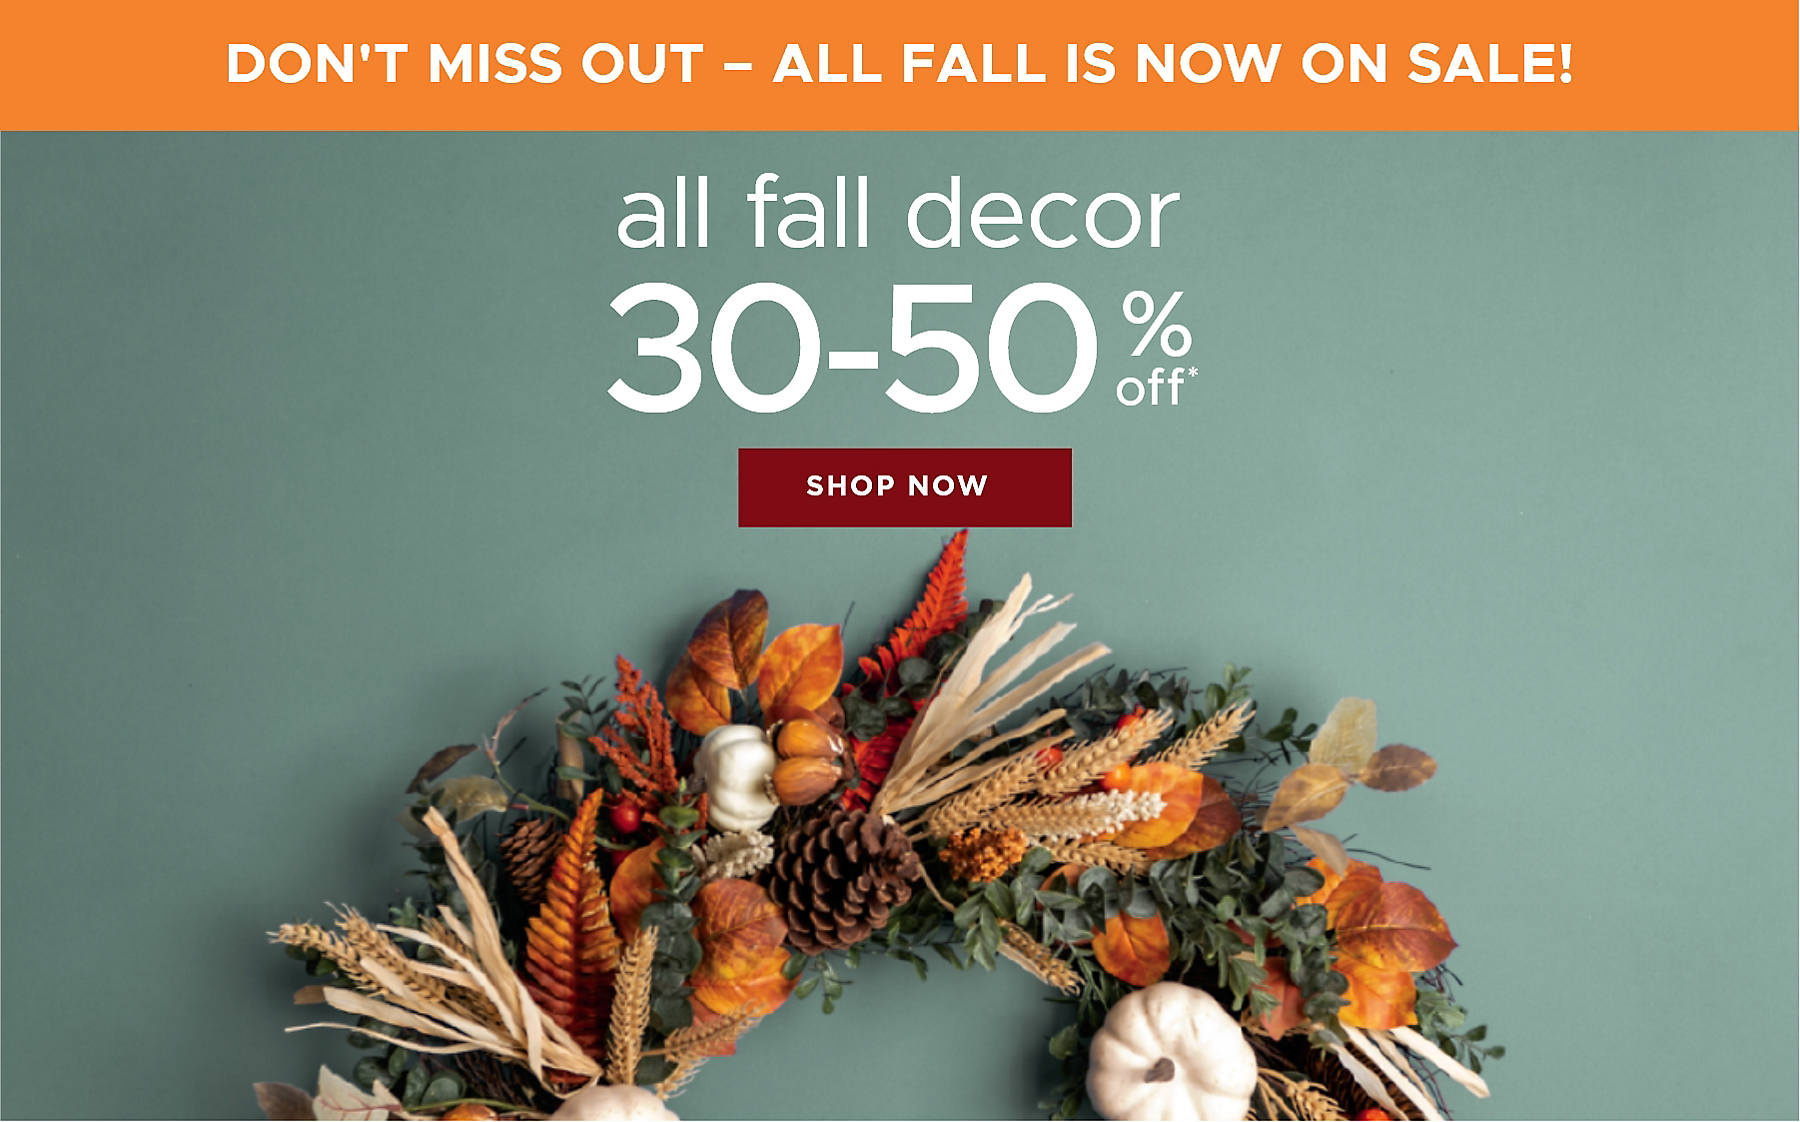 Don't miss out - All Fall is now on sale! all fall decor 30-50% off